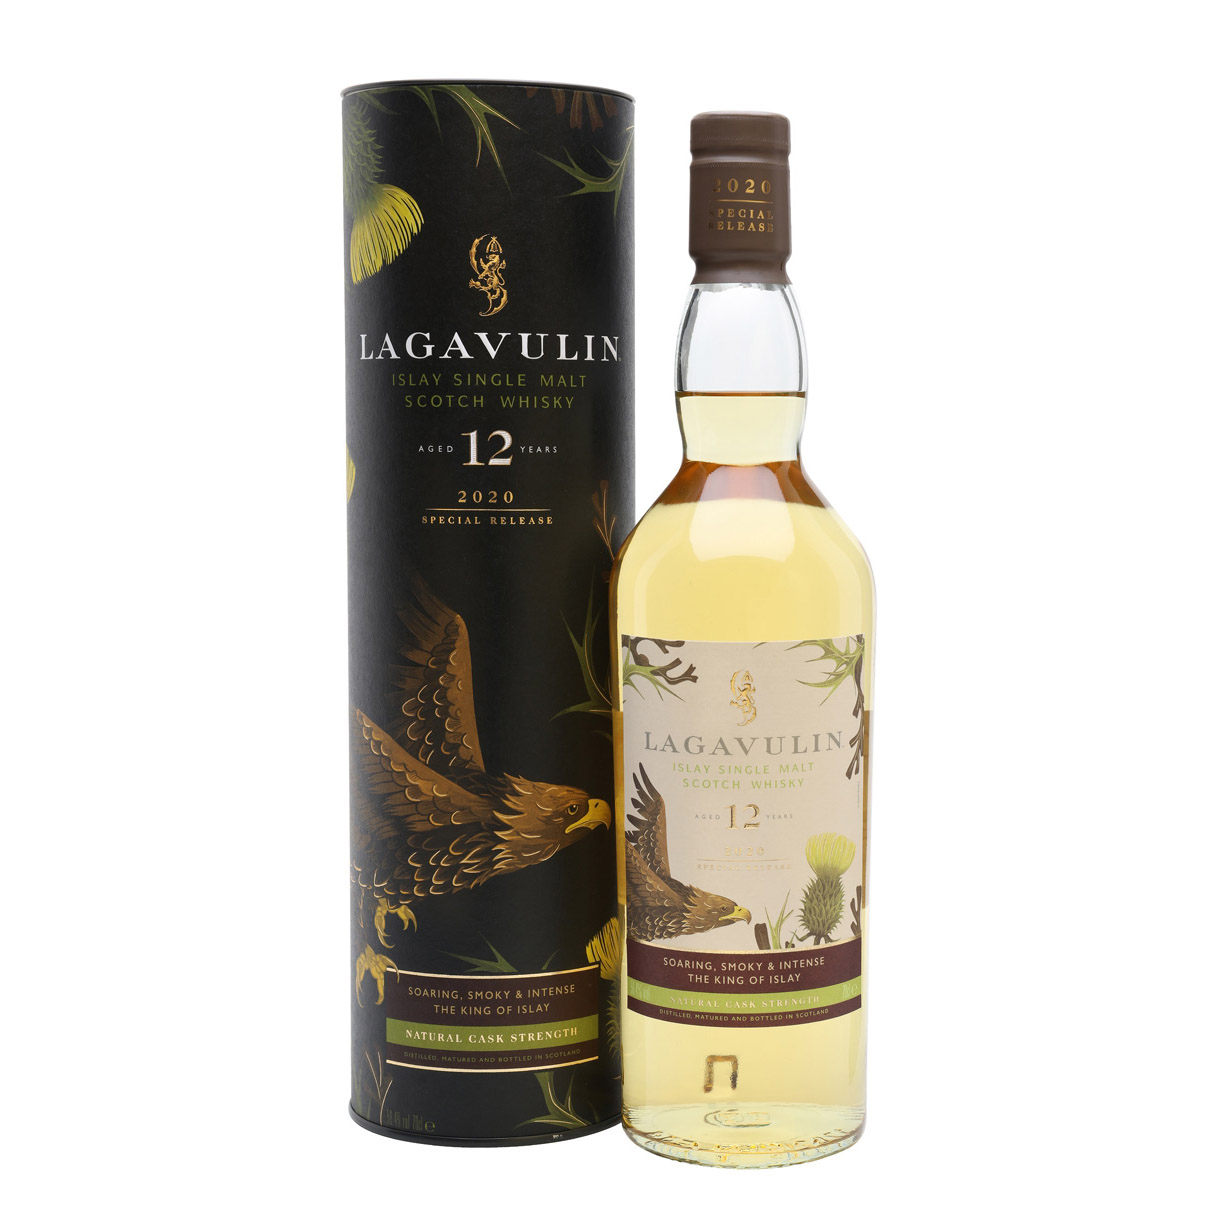 Lagavulin 12 Year Old Natural Cask Strength Single Malt Scotch Whisky (2020 Special Release)